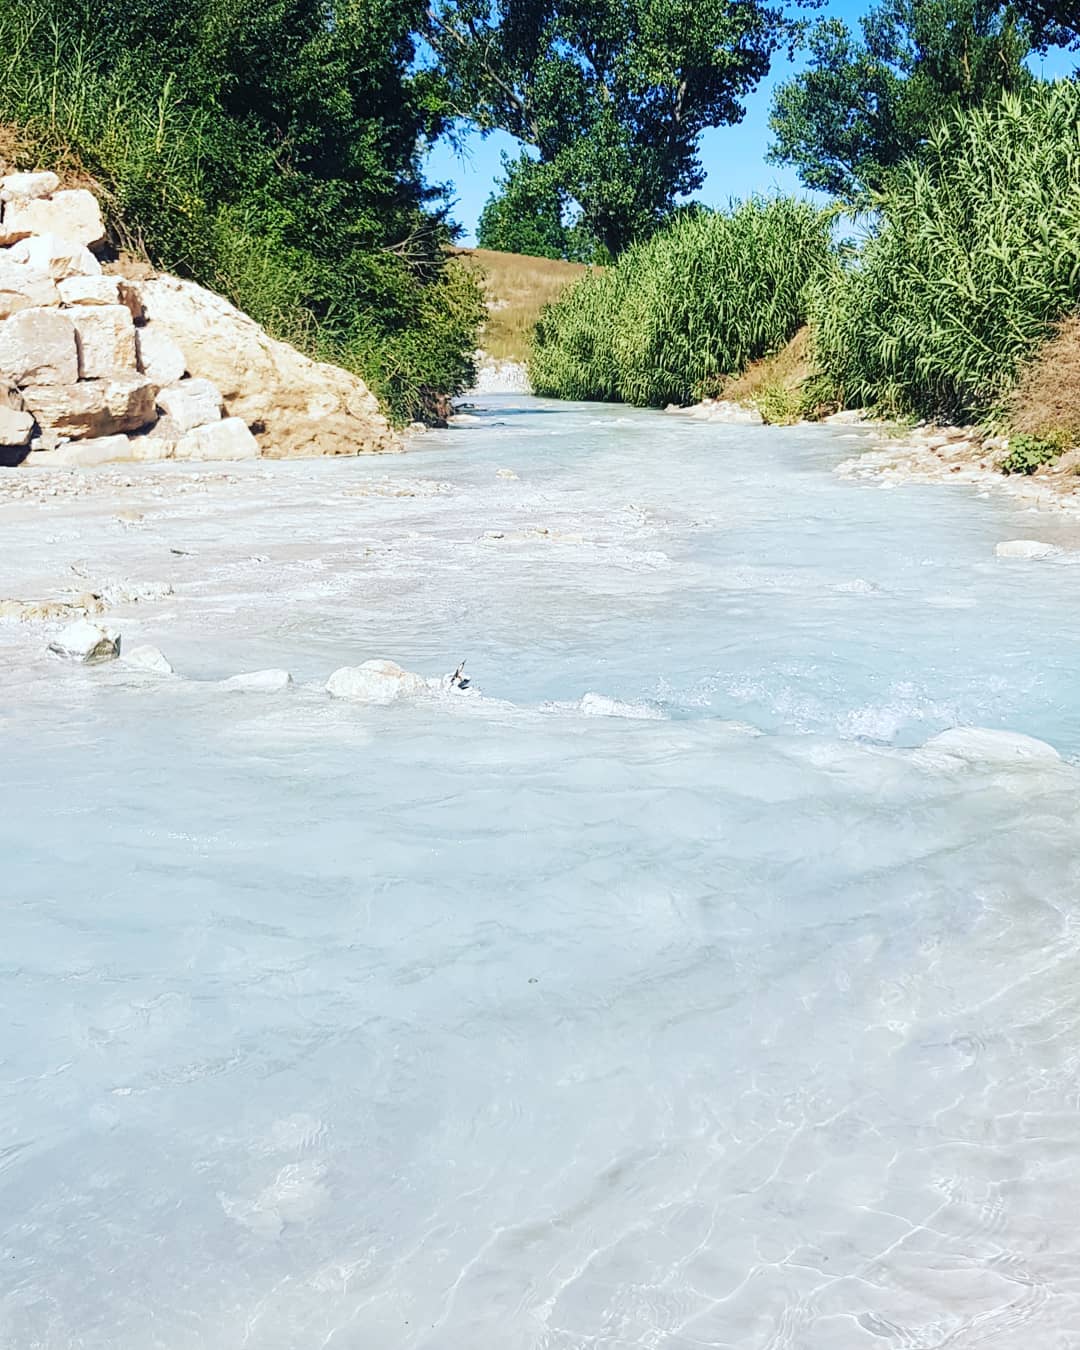 If you like to swim🏊‍♂️ in hot🔥 waters, then you should  go to Saturnia in the middle of Tuscany🌄, here you can enjoy a hot sulfur spring in the heart❤ of beautiful nature🌄 all year round and you can also bathe in it👍 #Saturnia #grosseto #tuscany #travel #swim #nature